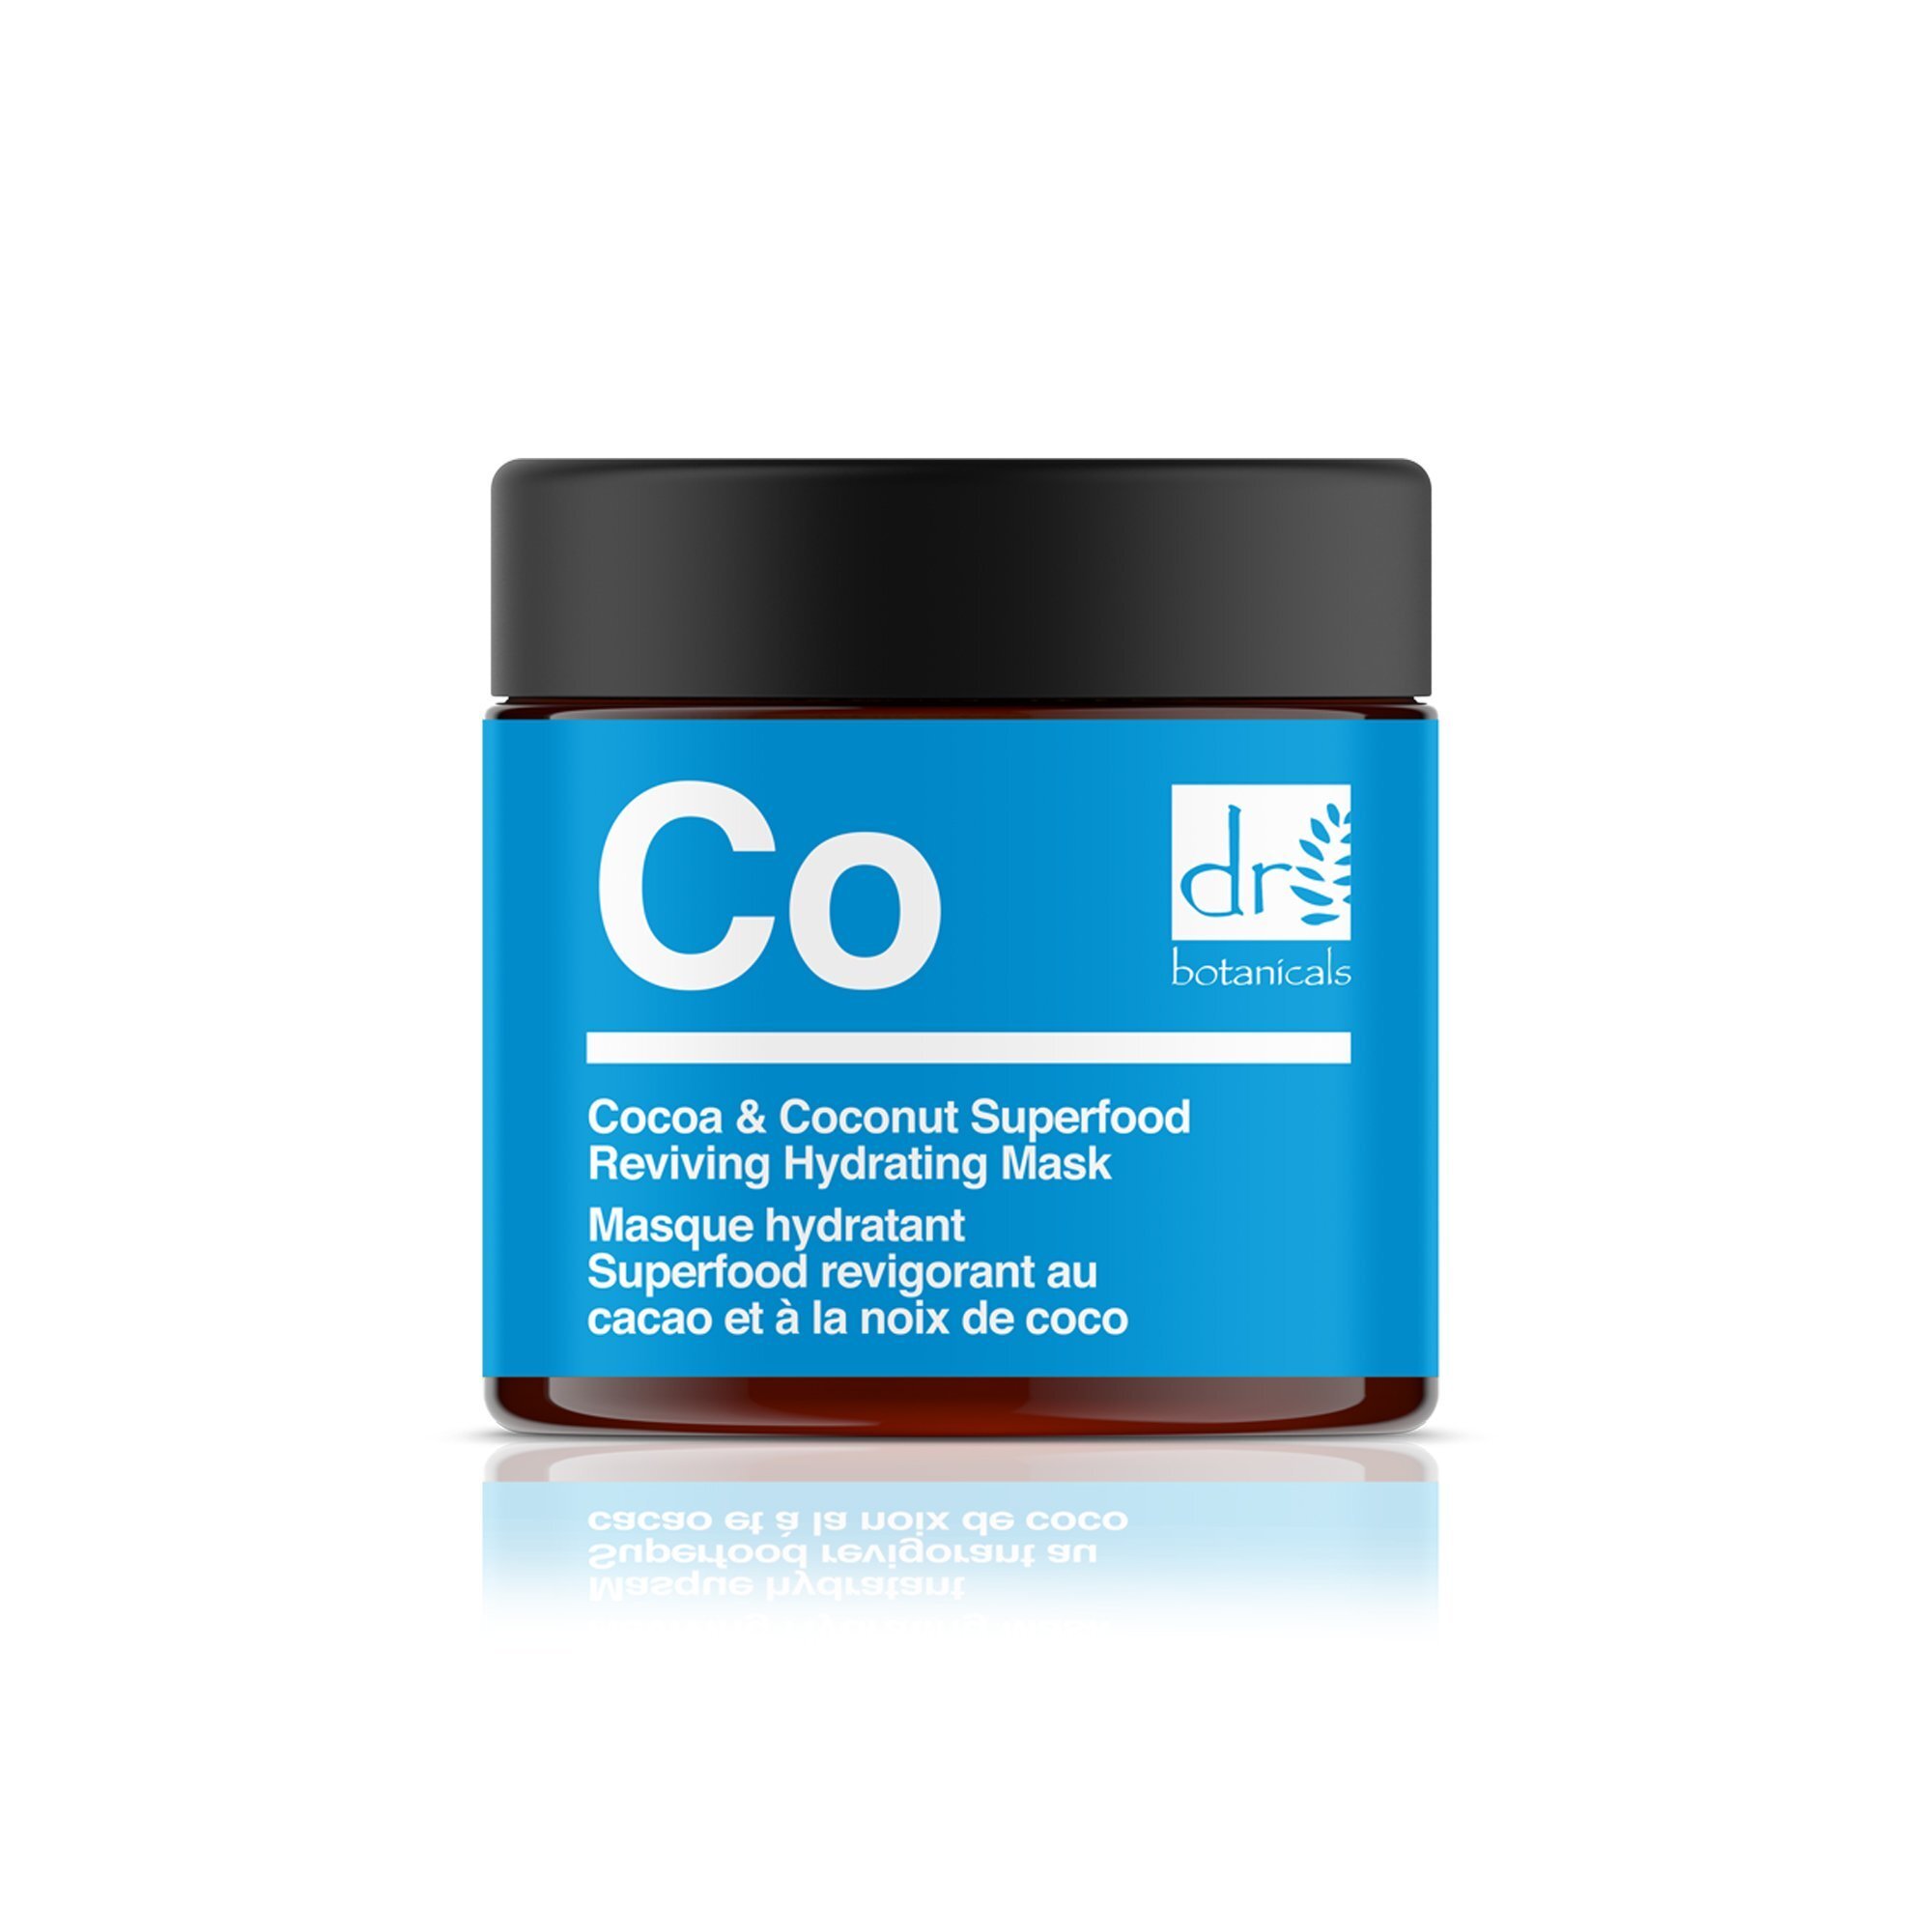 Dr Botanicals Cocoa & Coconut Superfood Reviving Hydrating Mask 50 ml